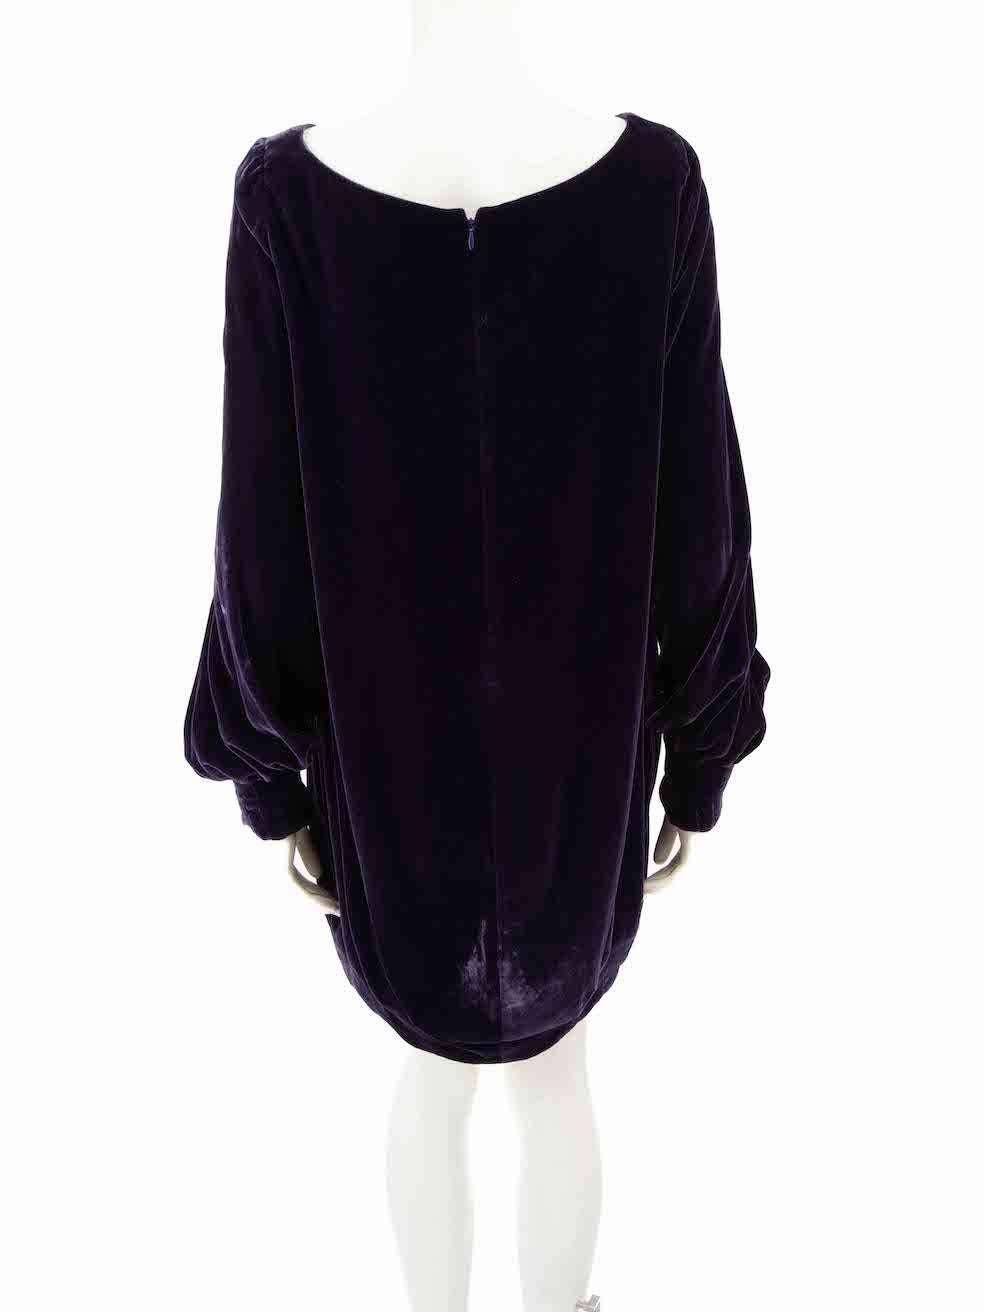 Alexander McQueen Purple Velvet Tunic Dress Size L In Good Condition For Sale In London, GB